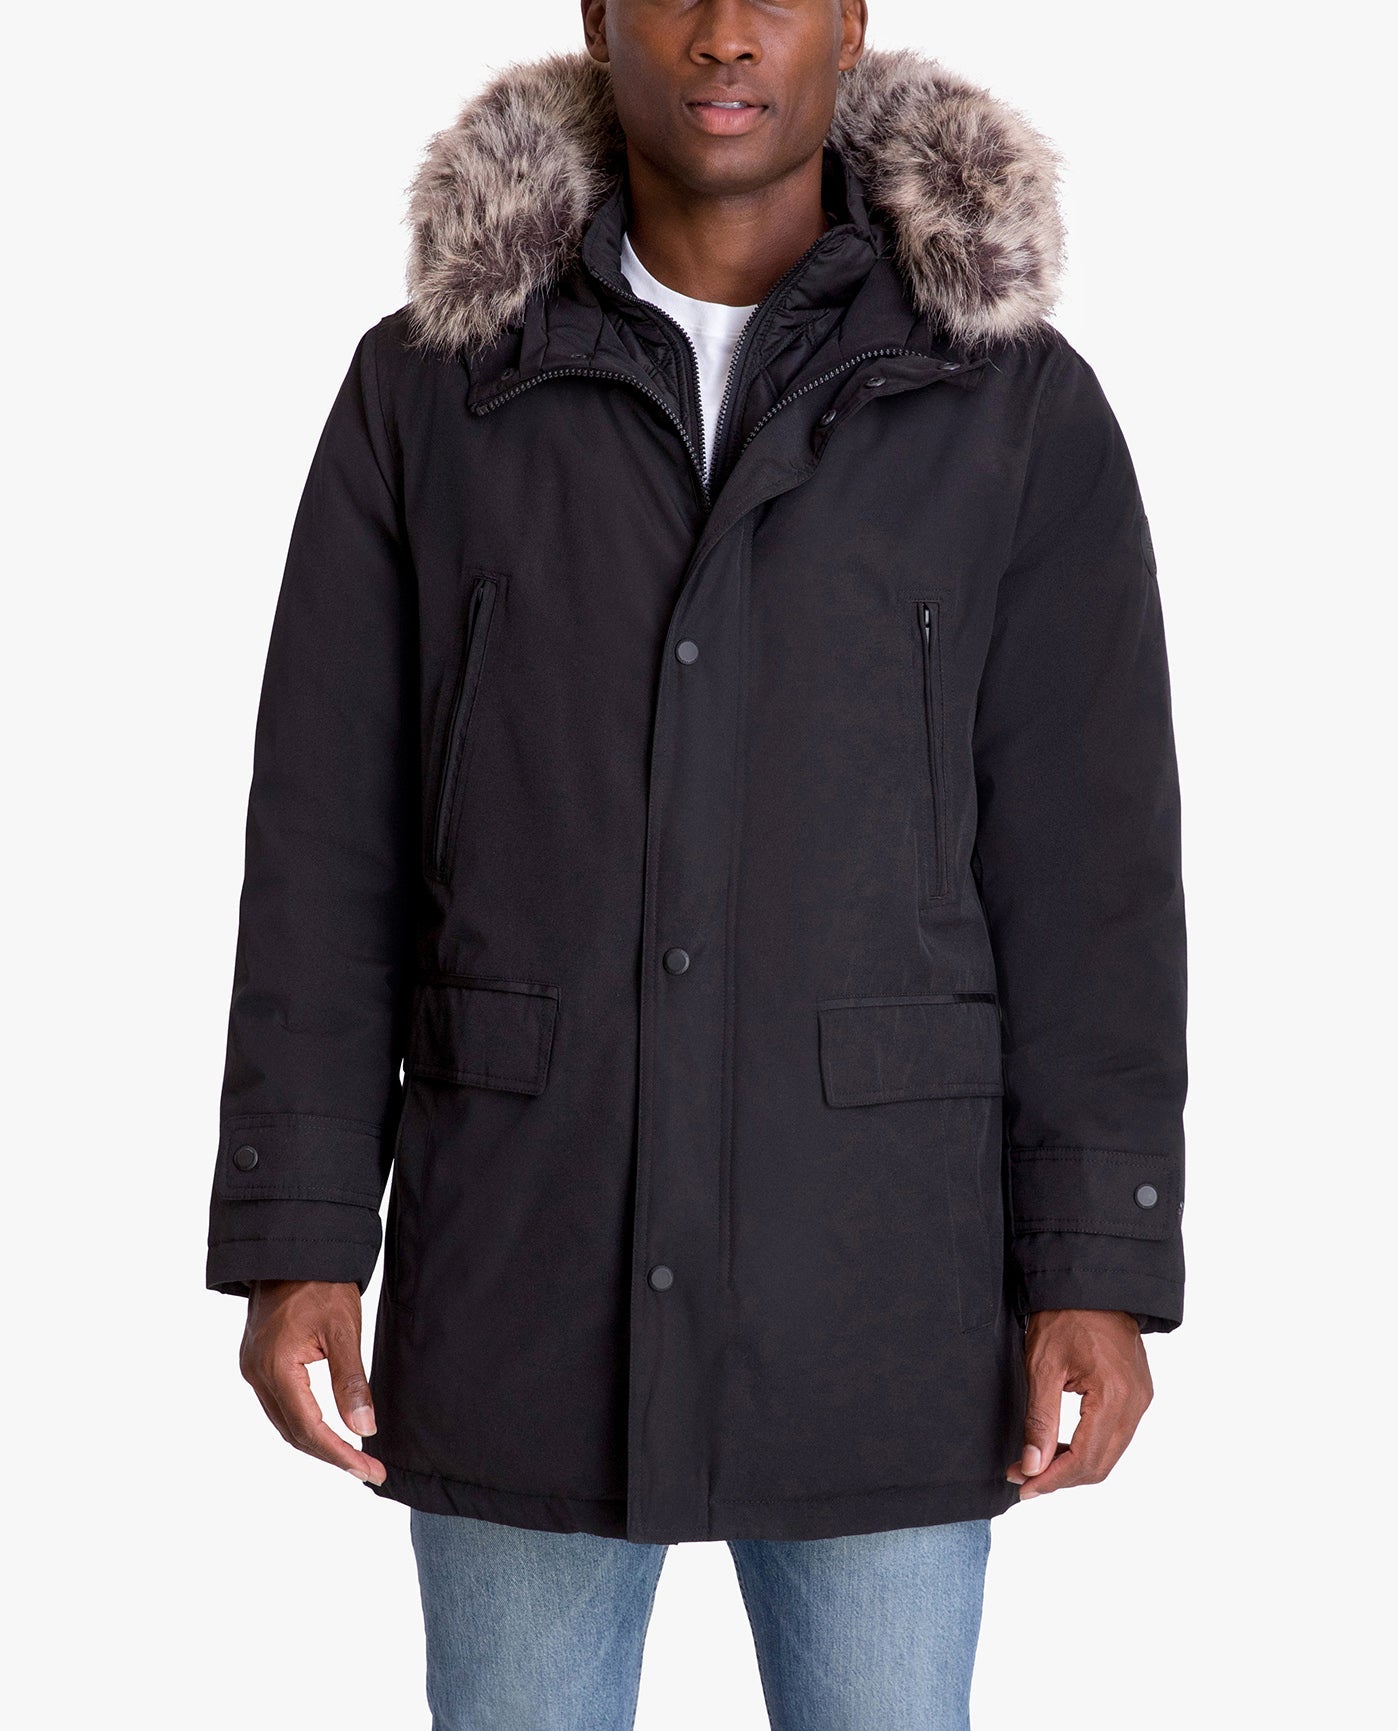 DETAIL VIEW OF ARTIC PARKA WITH REMOVABLE FAUX FUR TRIMMED HOOD | BLACK